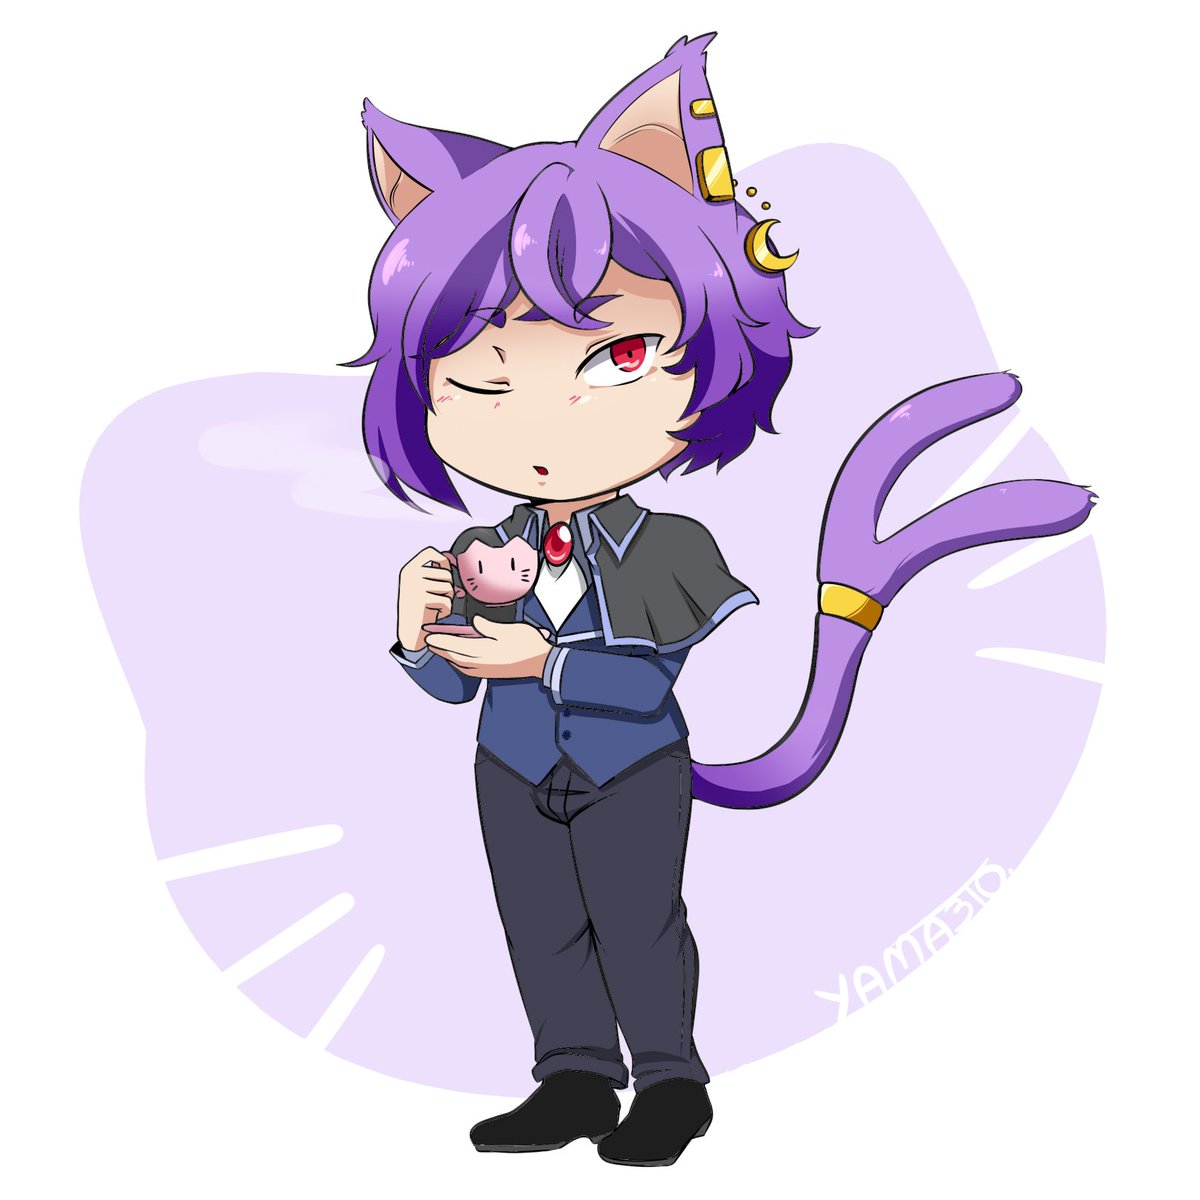 A present for me Drawn by  @fiblertSOS one year for my birthday. It's Nekomata Sirius having some tea and giving you a look cause he's just trying to enjoy himself.